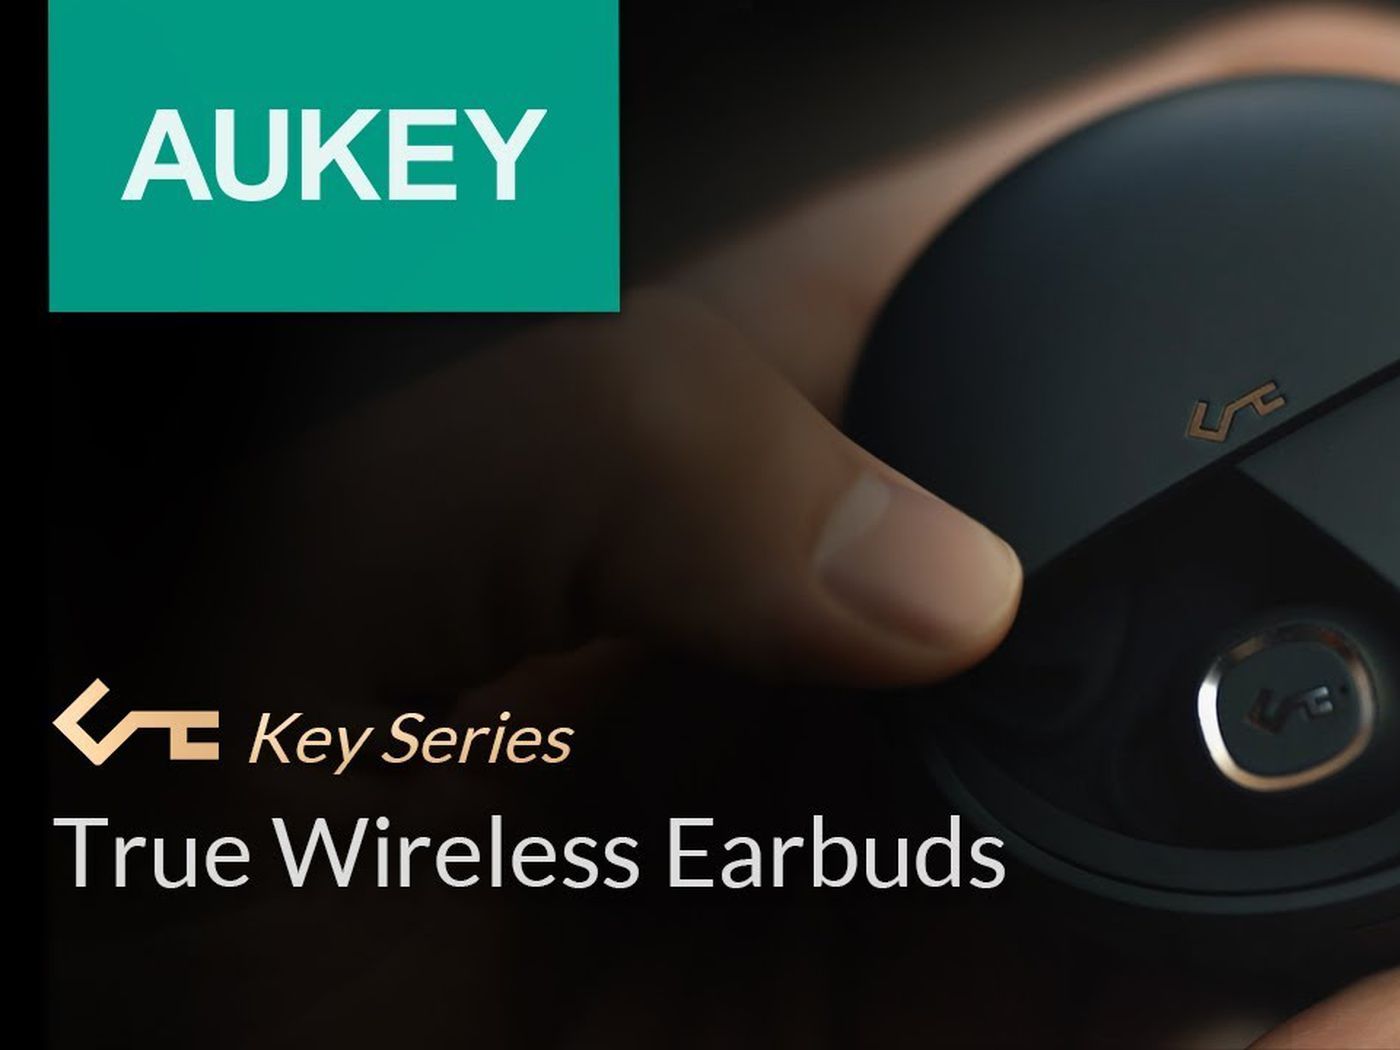 Are Aukey True Wireless Earbuds Good? 5 Features Need to Consider